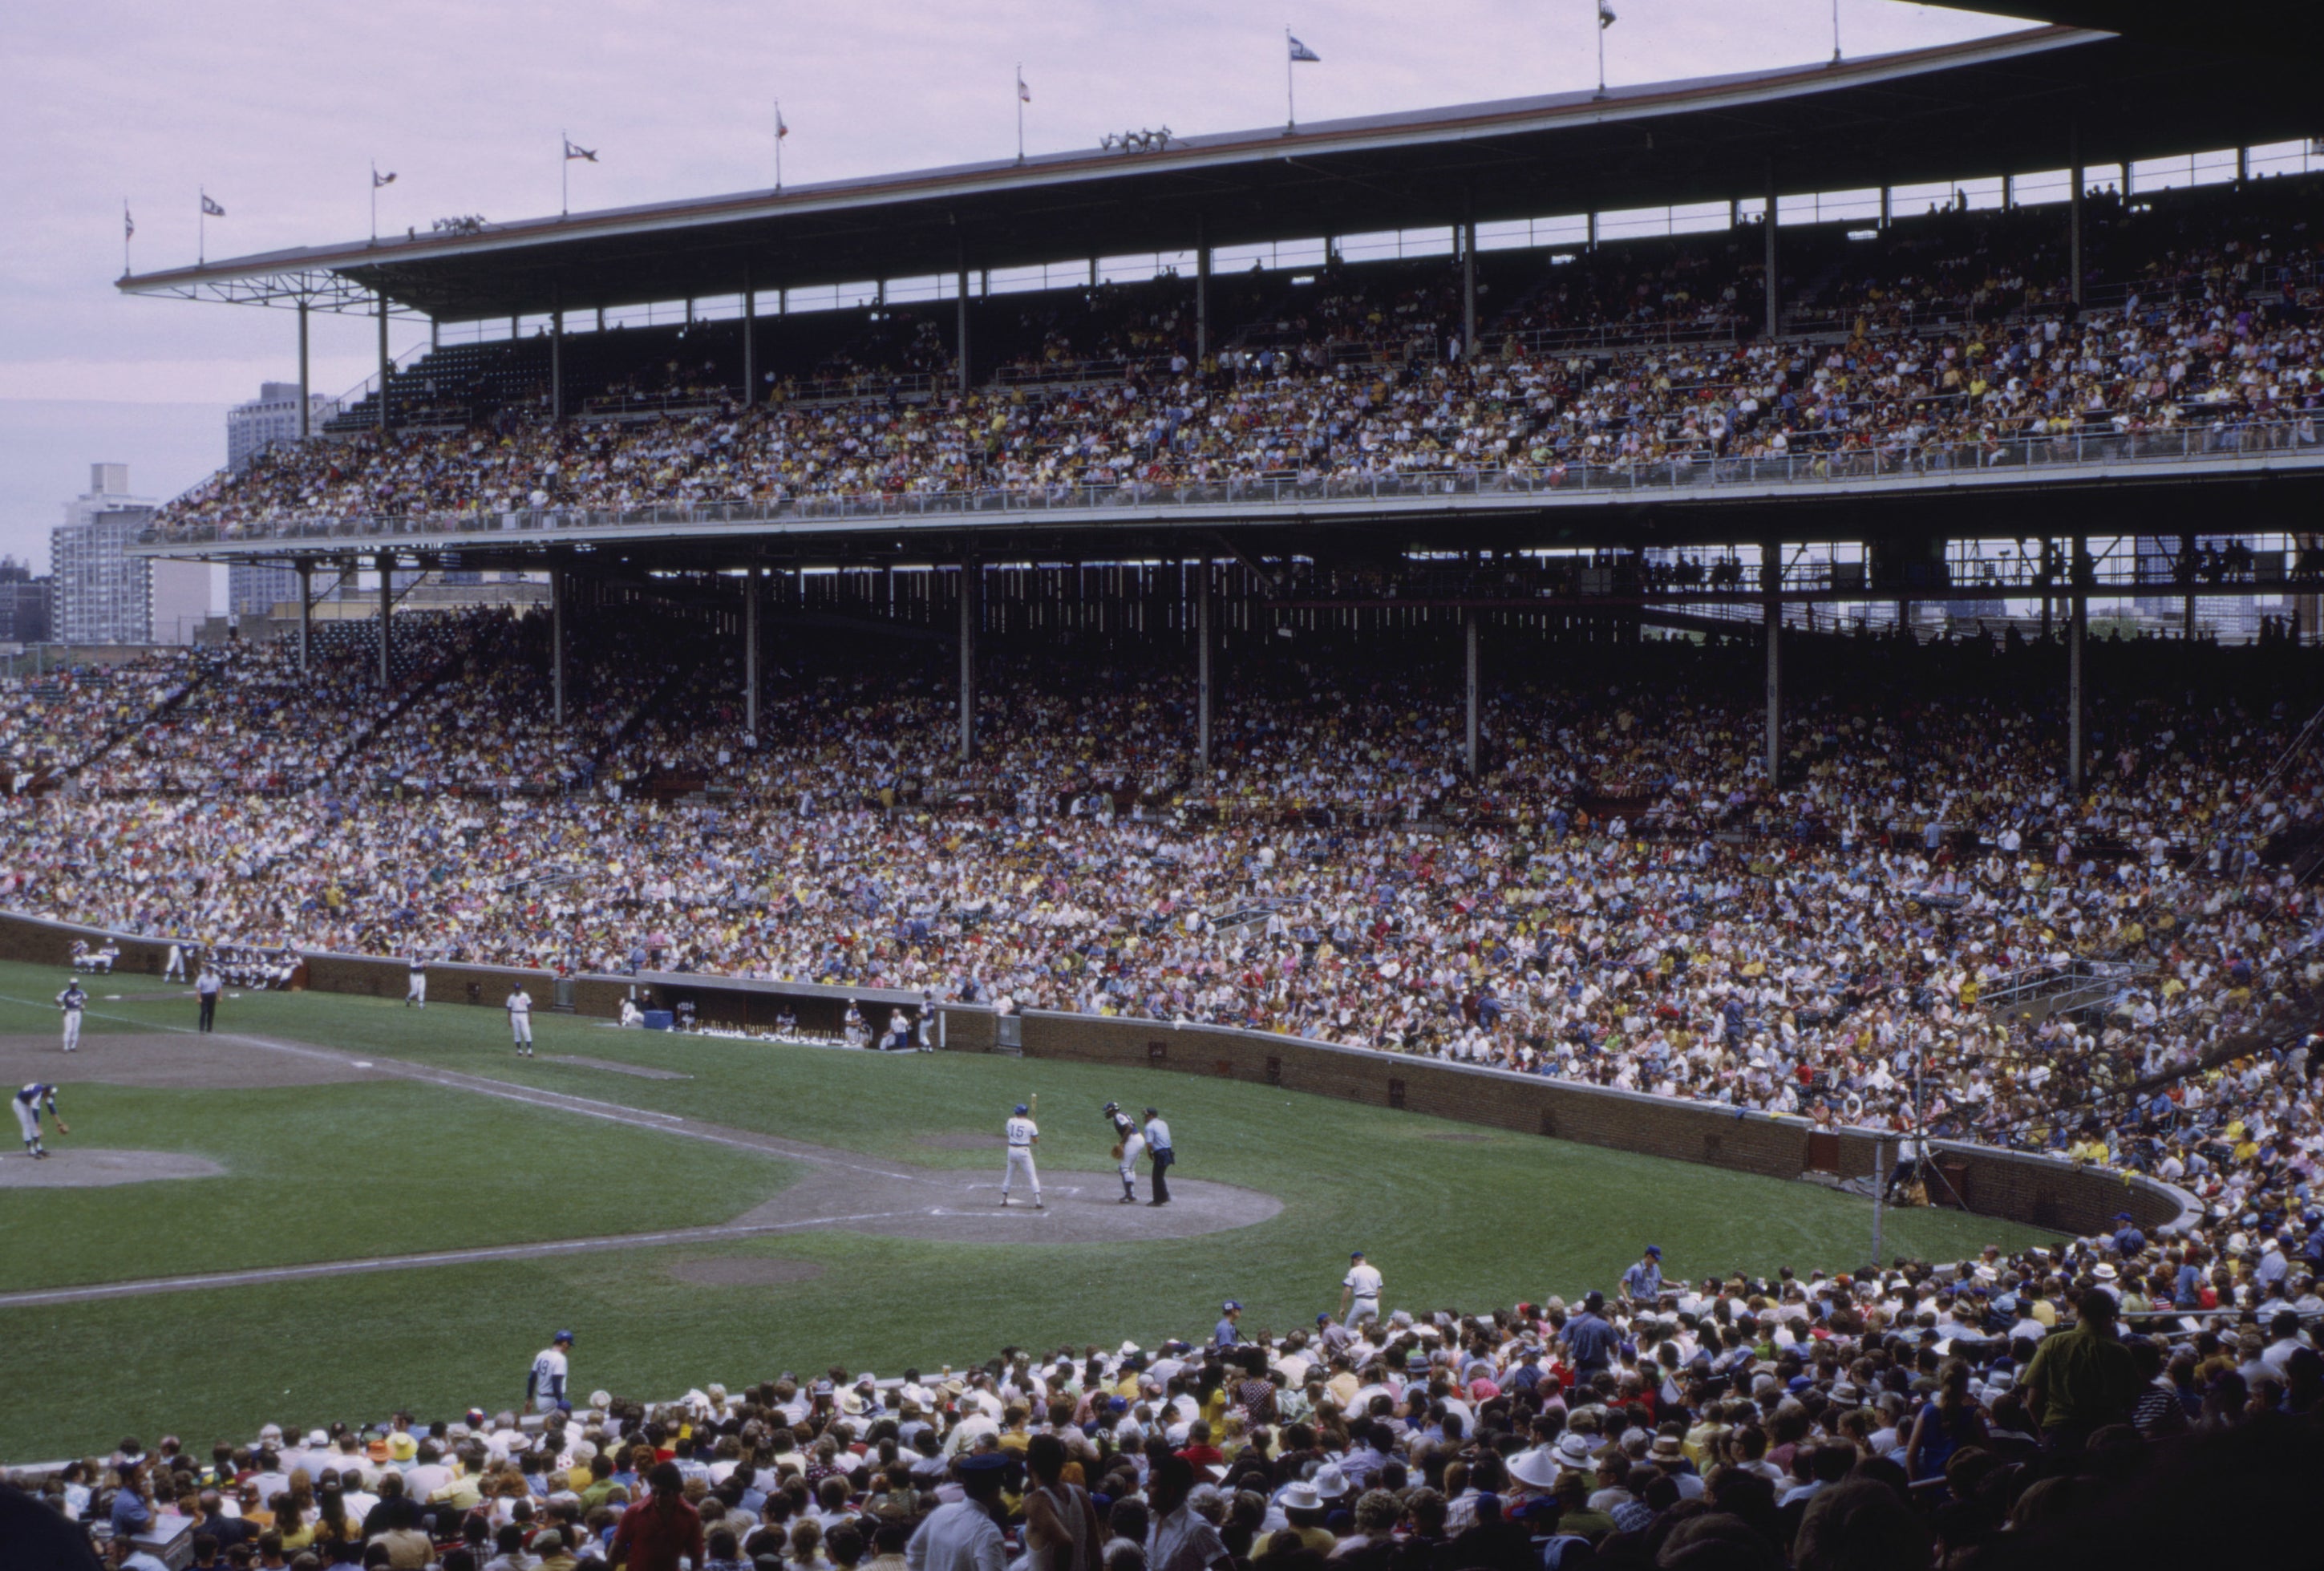 Wrigley Field is pictured during a 1972 game